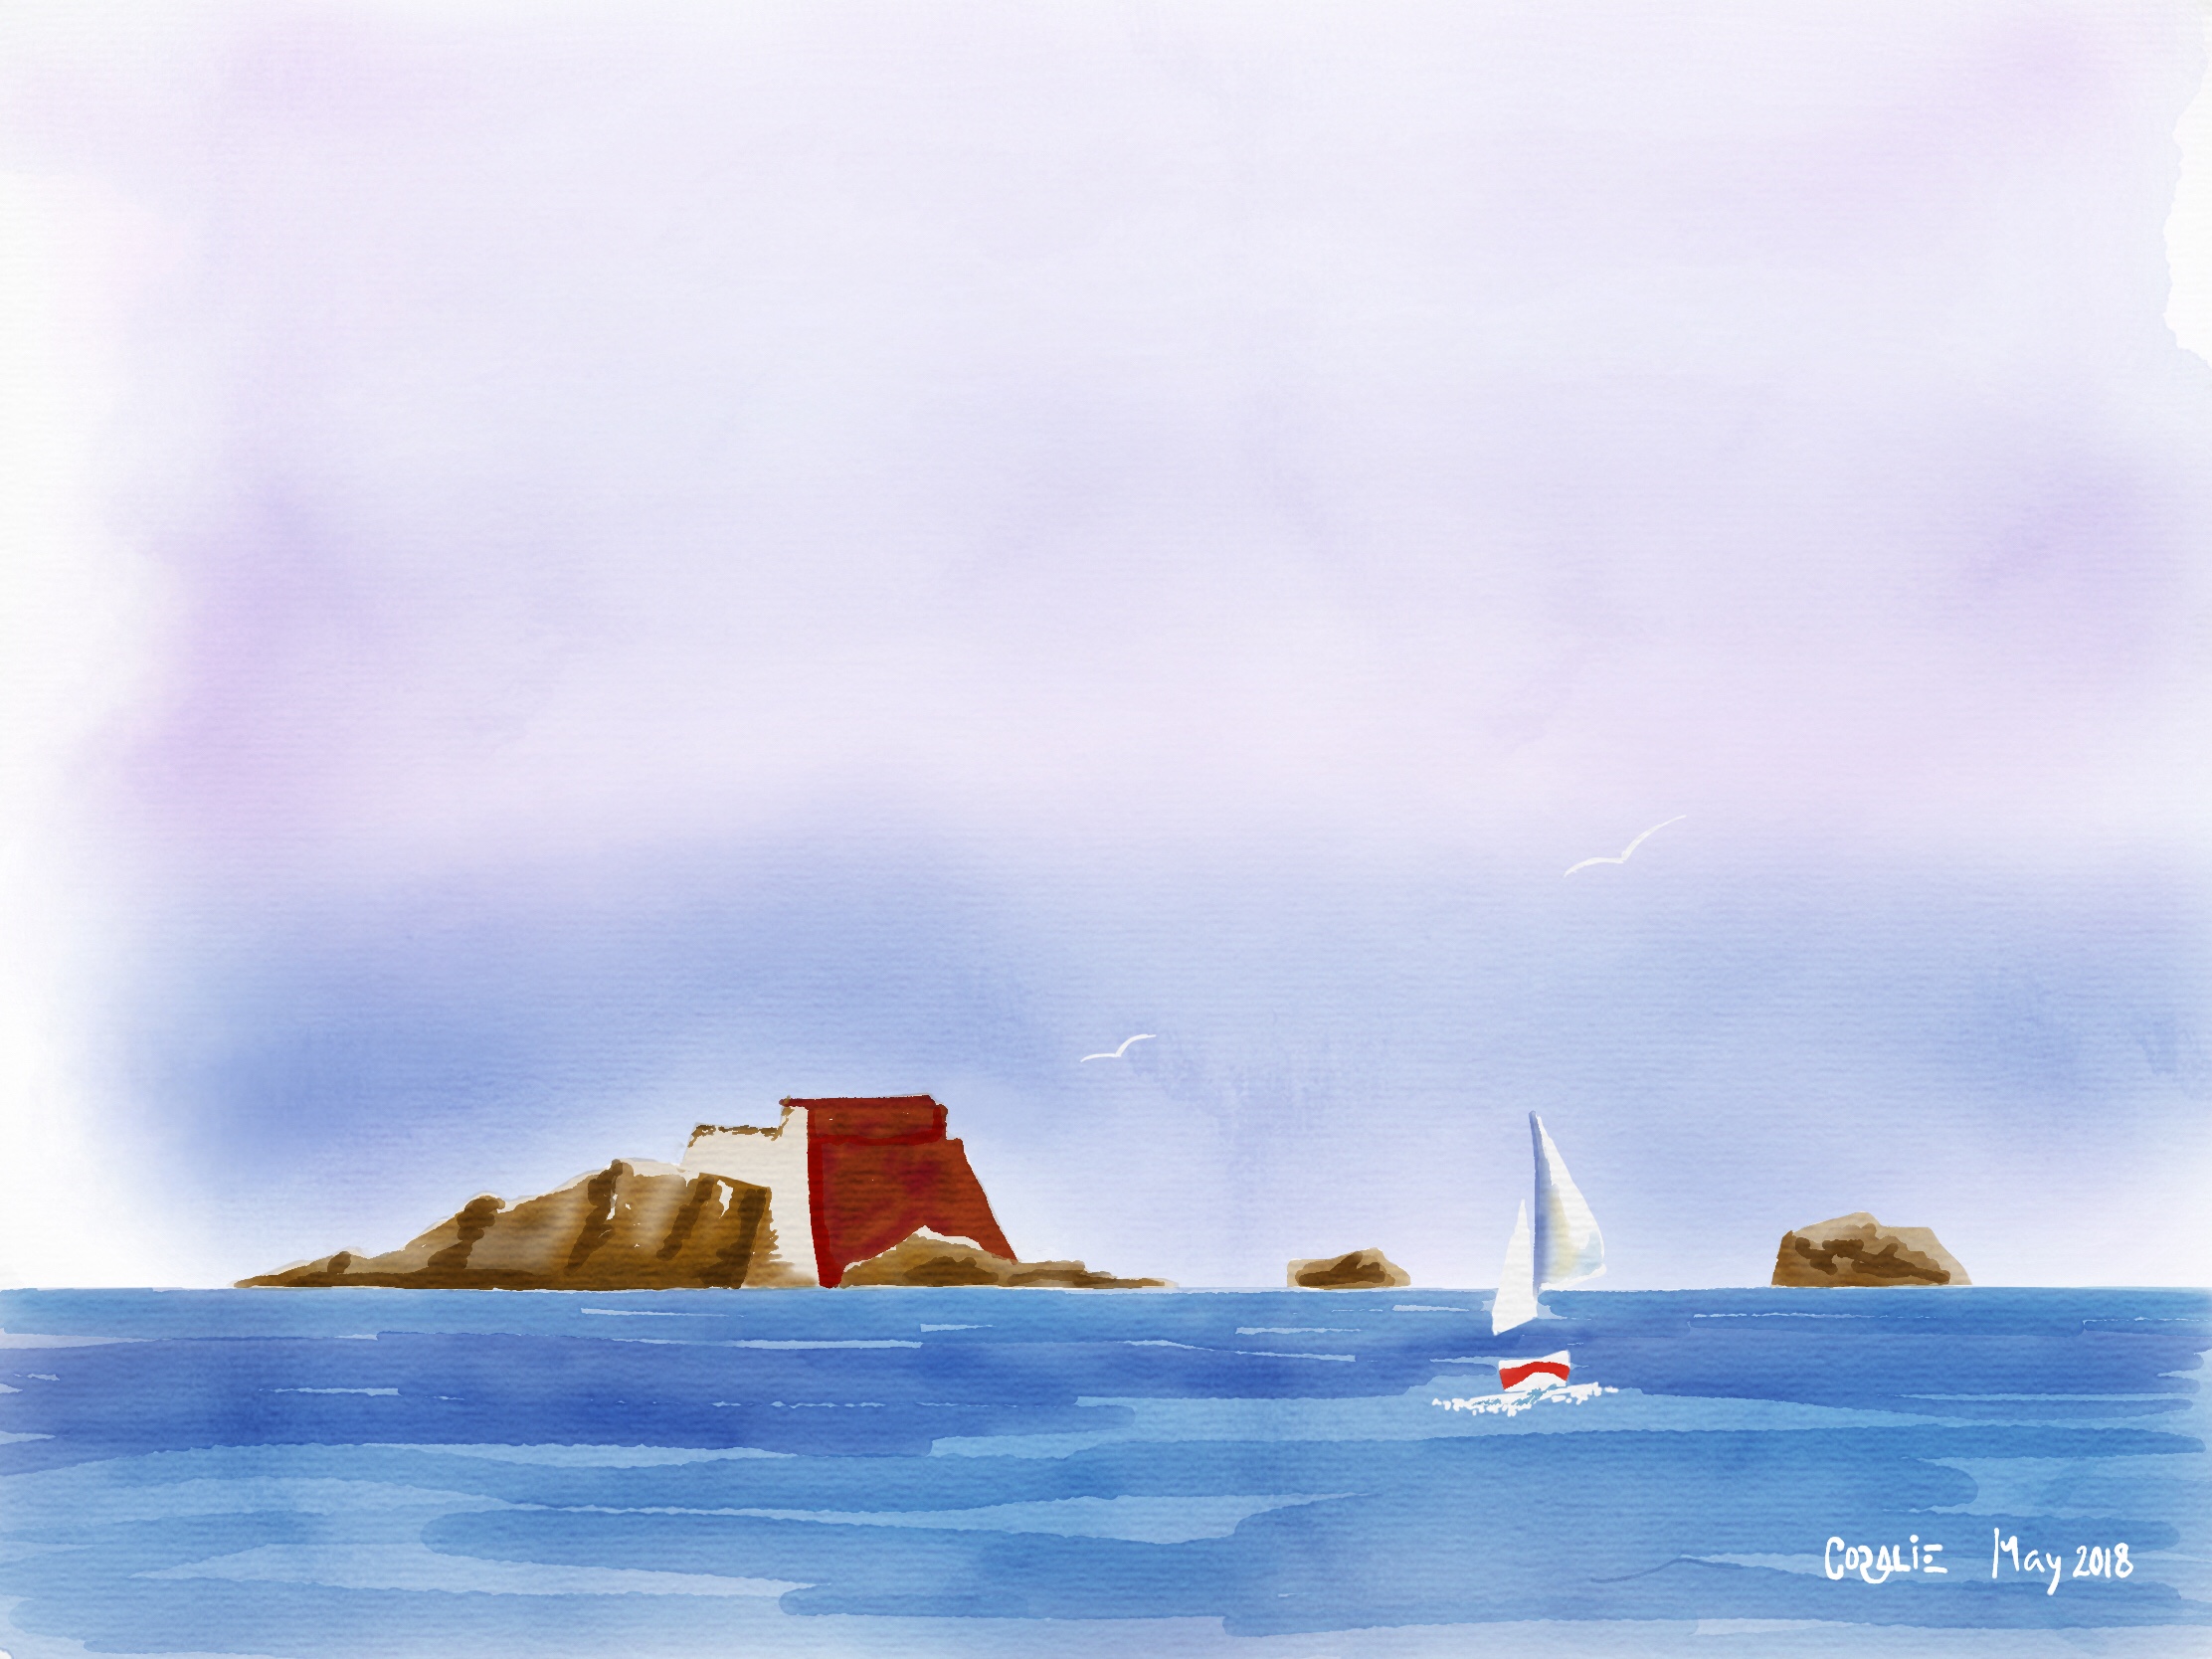 I painted the fort red, darkened the rocks, erased paint where the seagulls were, added a red stripe to the sailboat and white foam around it, removed the layer that had the sketch I applied my signature and date at the bottom right.